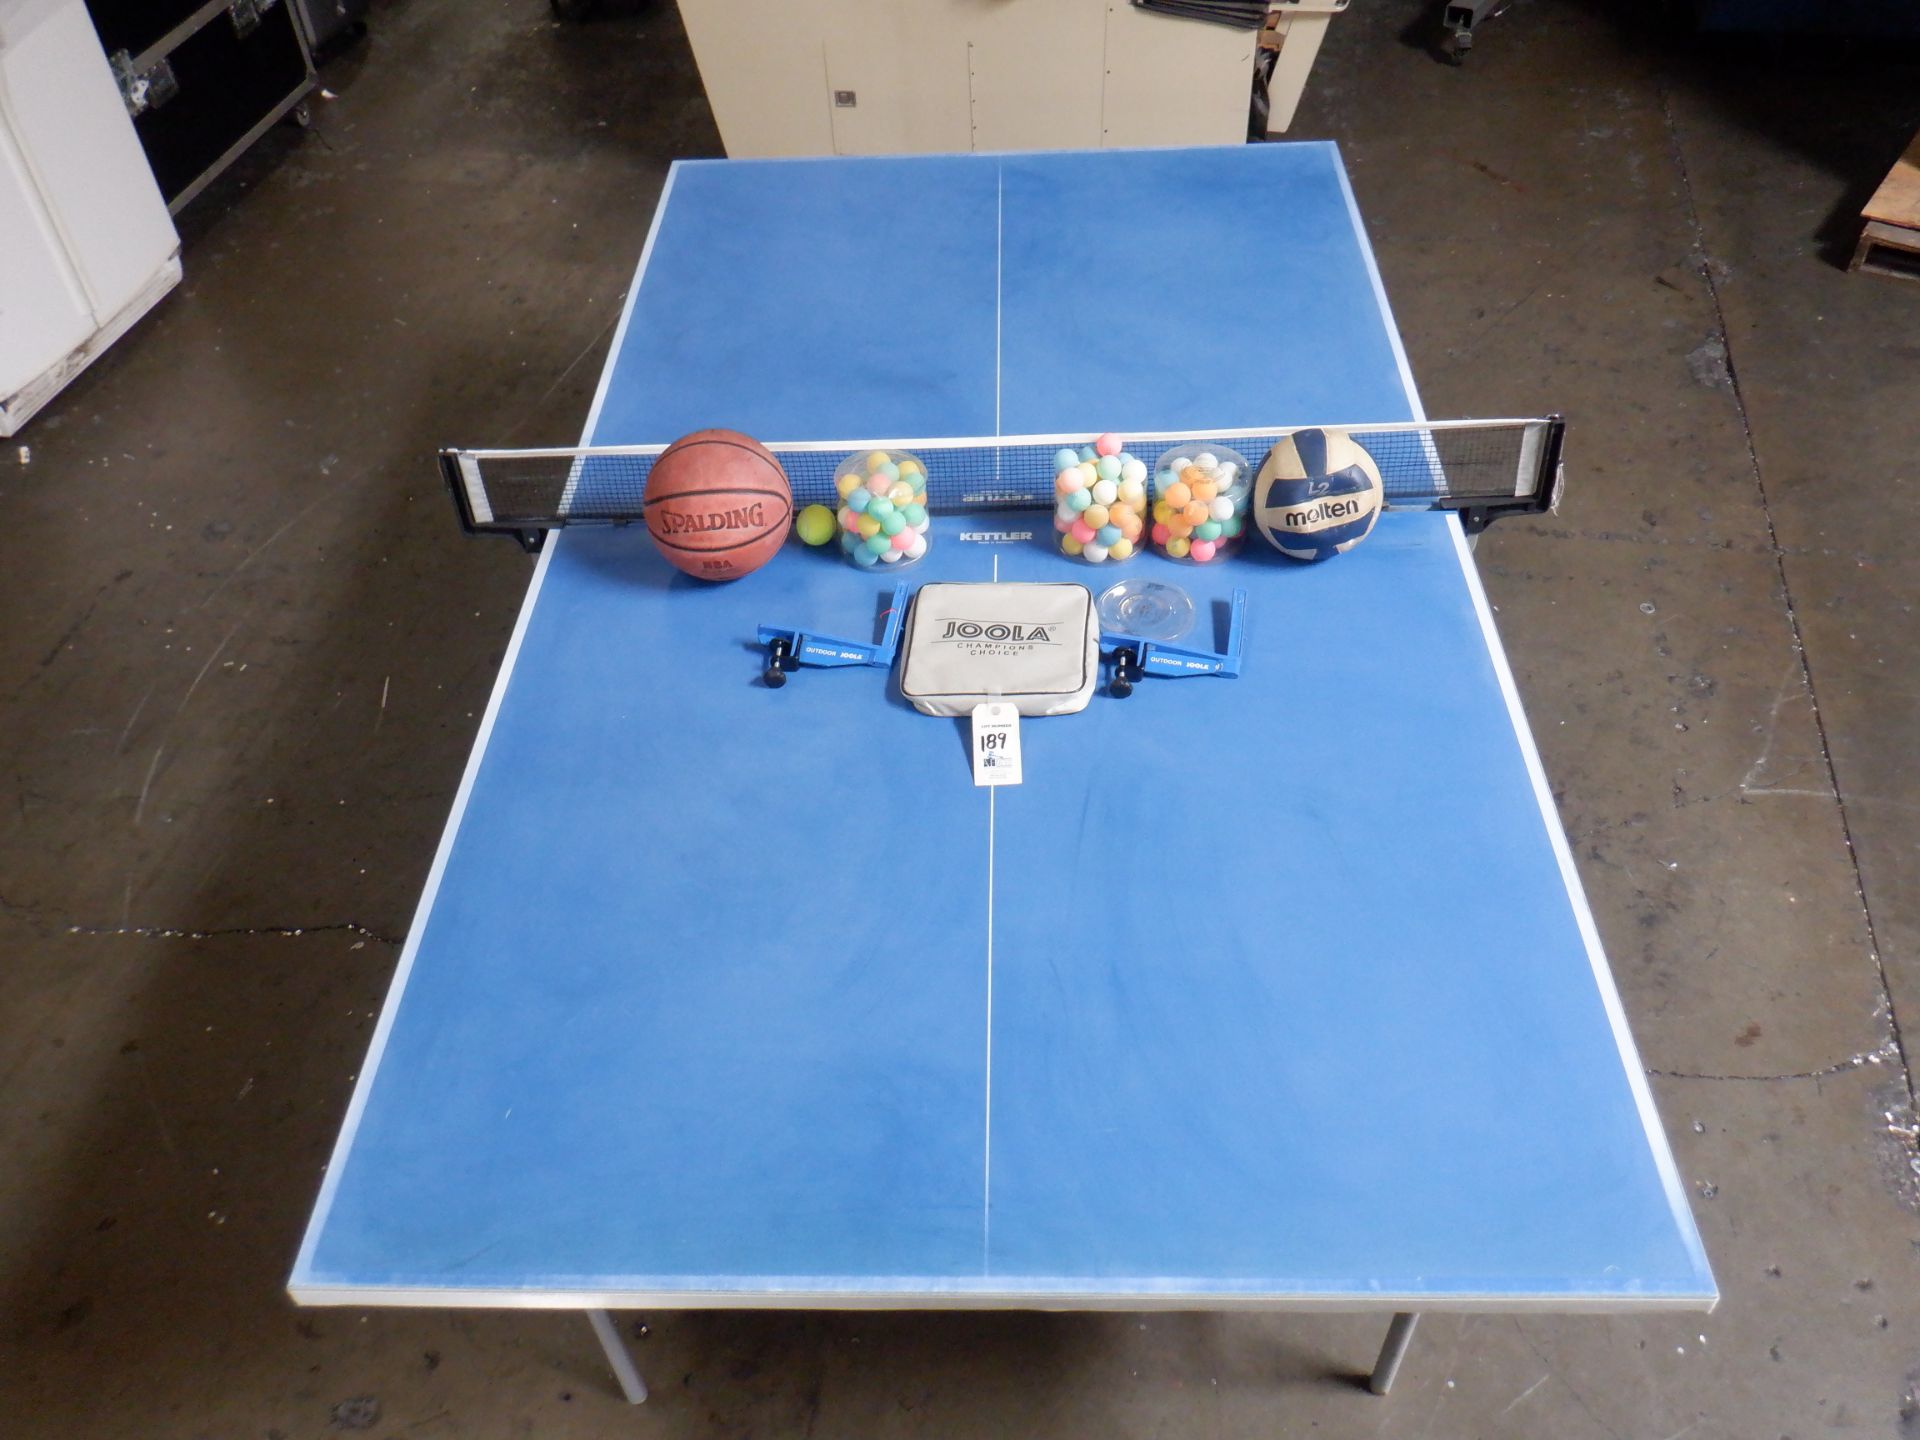 KETTLER OUTDOOR ALUMINUM PING PONG TABLE WITH BALLS - Image 3 of 4